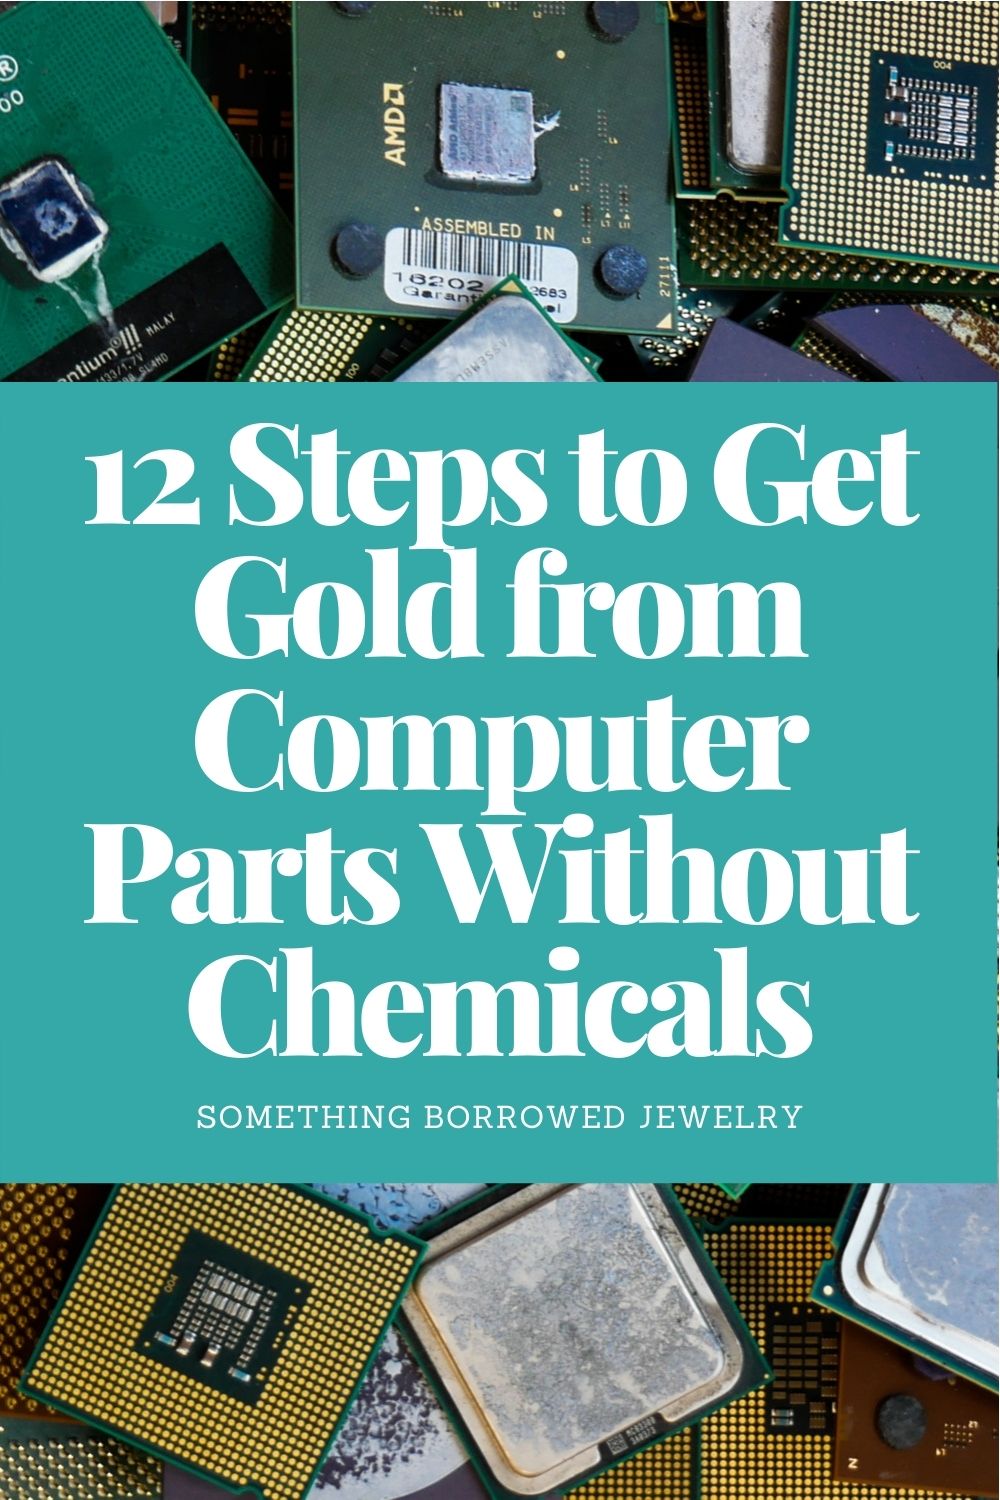 12 Steps to Get Gold from Computer Parts Without Chemicals pin 2